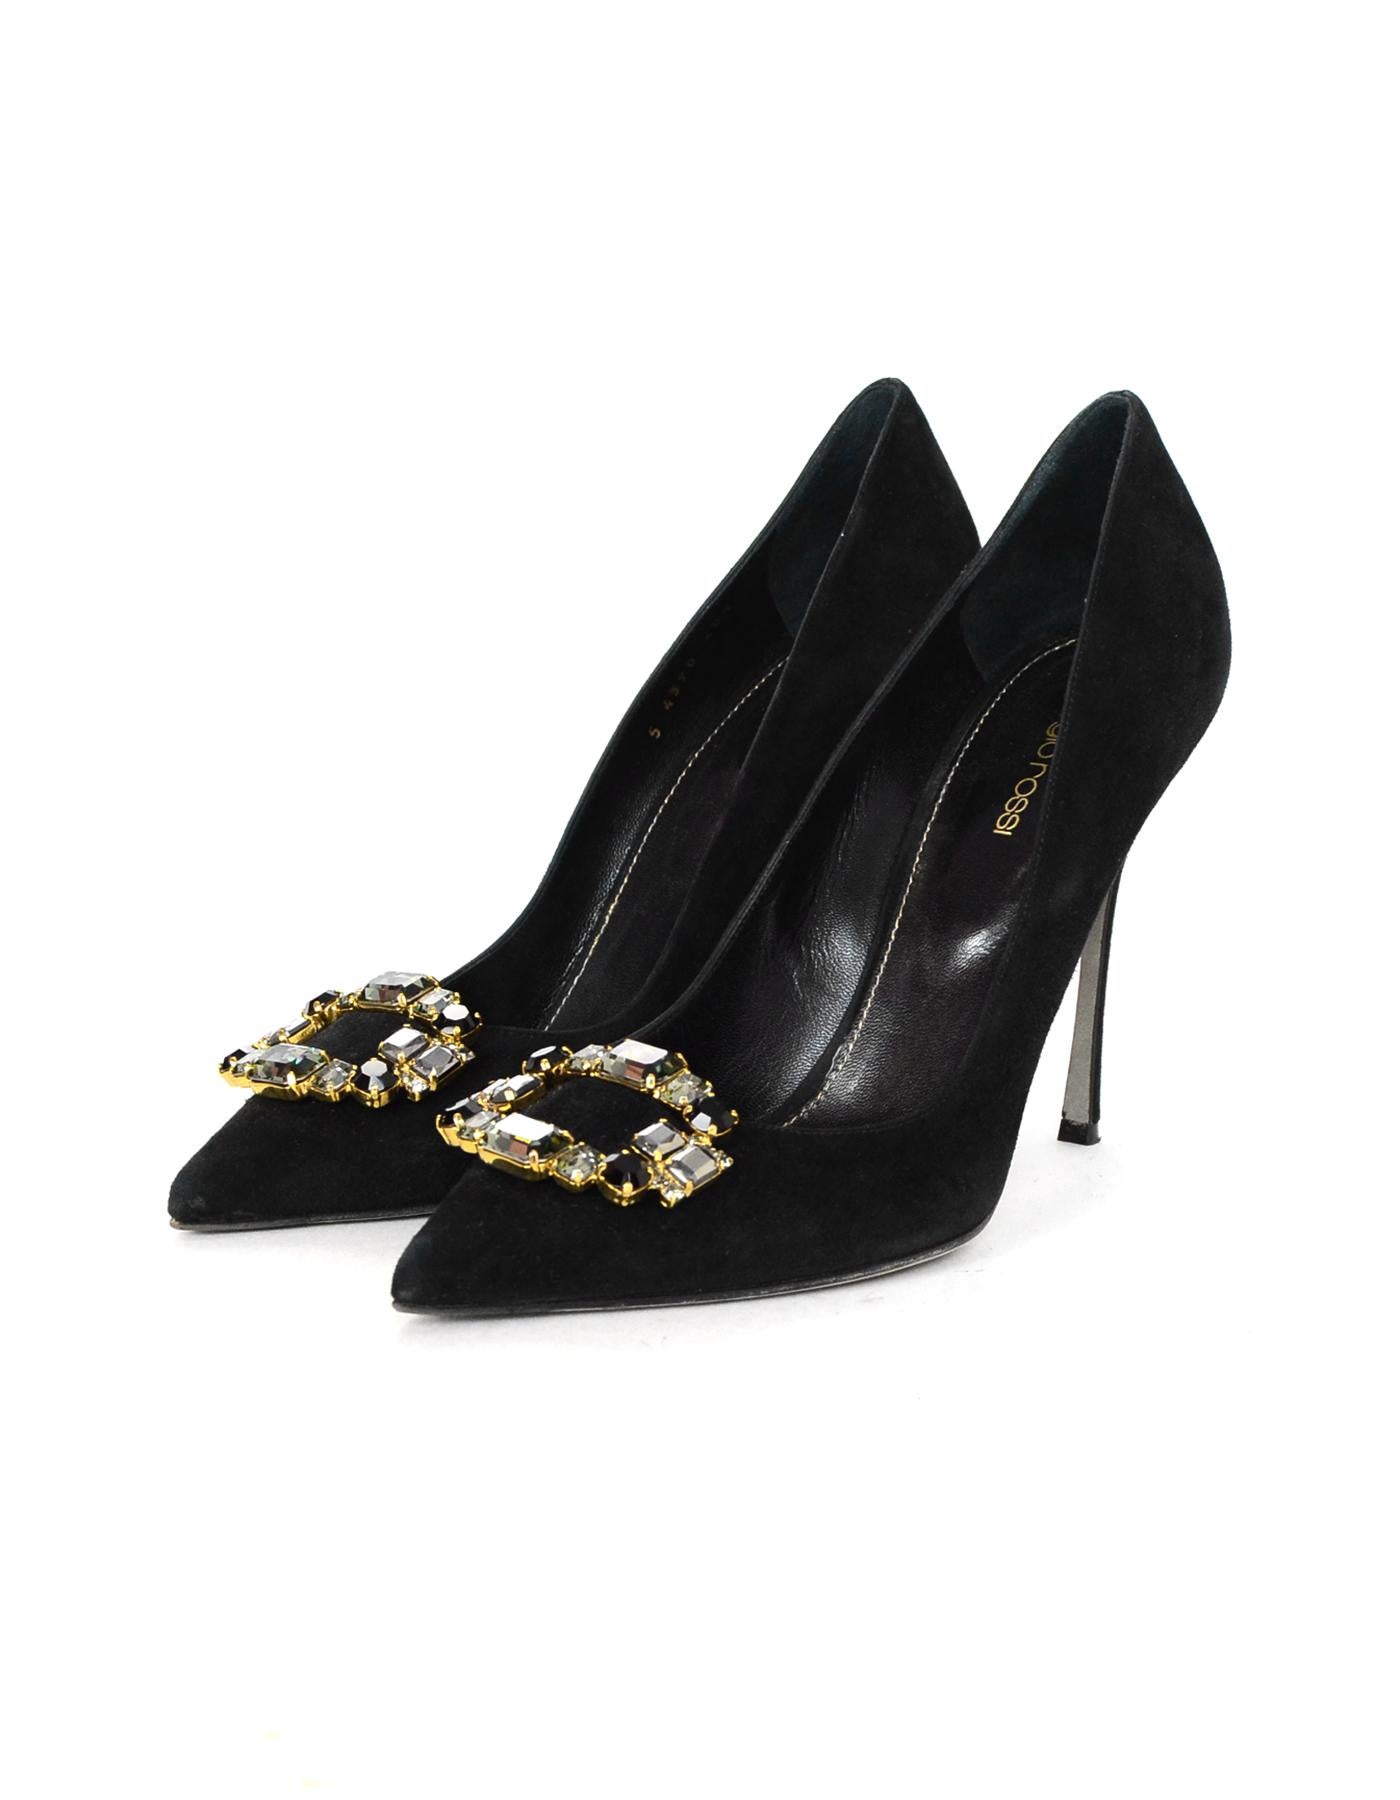 Sergio Rossi Black Suede Crystal Embellished Pumps Sz 40.5

Made In: Italy
Color: Black
Hardware: Goldtone
Materials: Suede, goldtone metal, crystals
Closure/Opening: Slide on
Overall Condition: Excellent pre-owned condition with exception of very